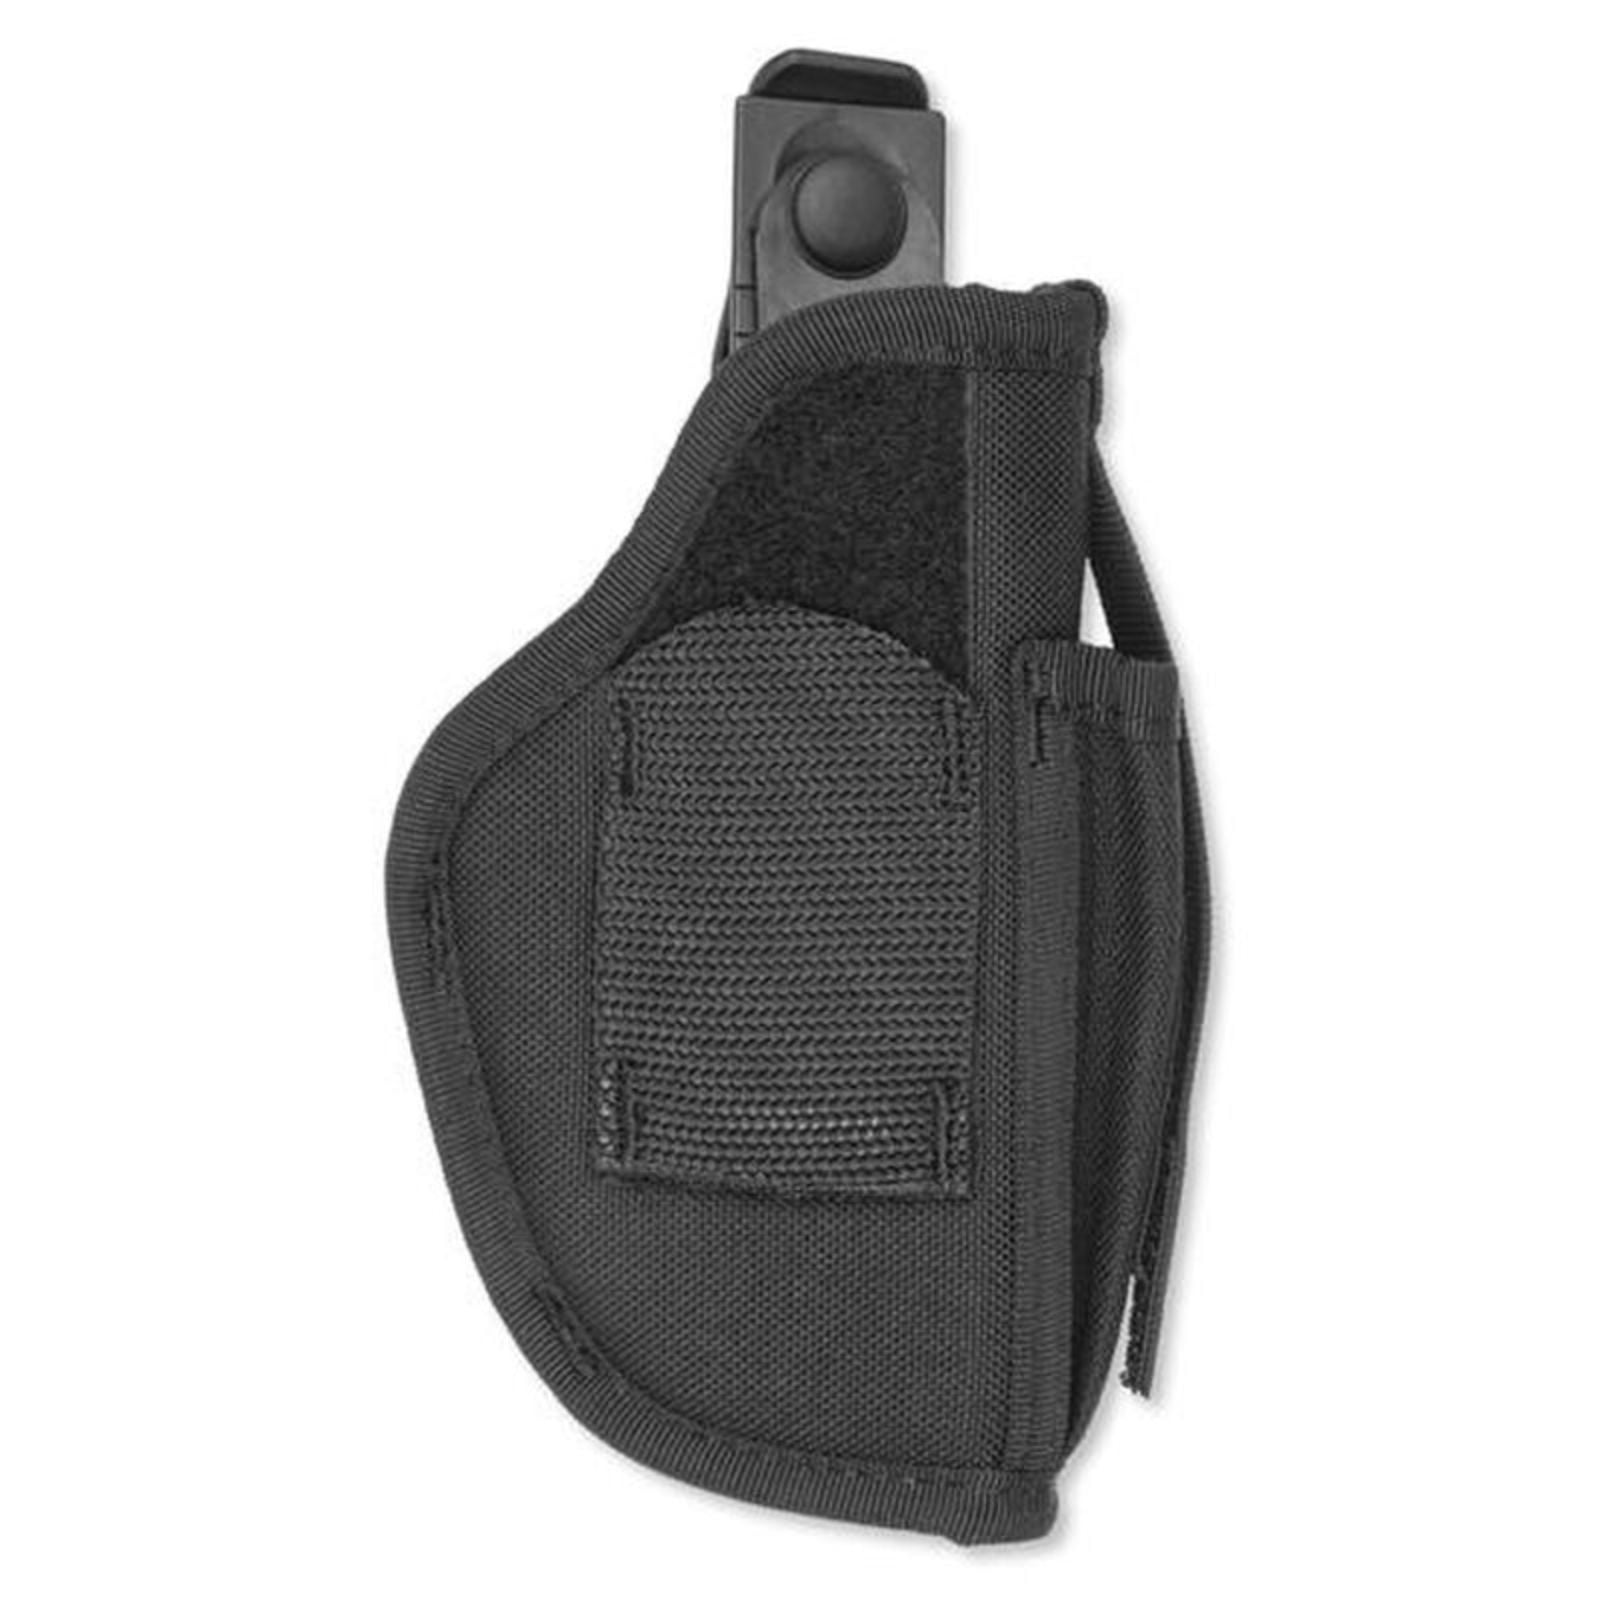 Allen Company 44346 Ambidextrous Holster for 0380 Pistol With Laser Black for sale online 